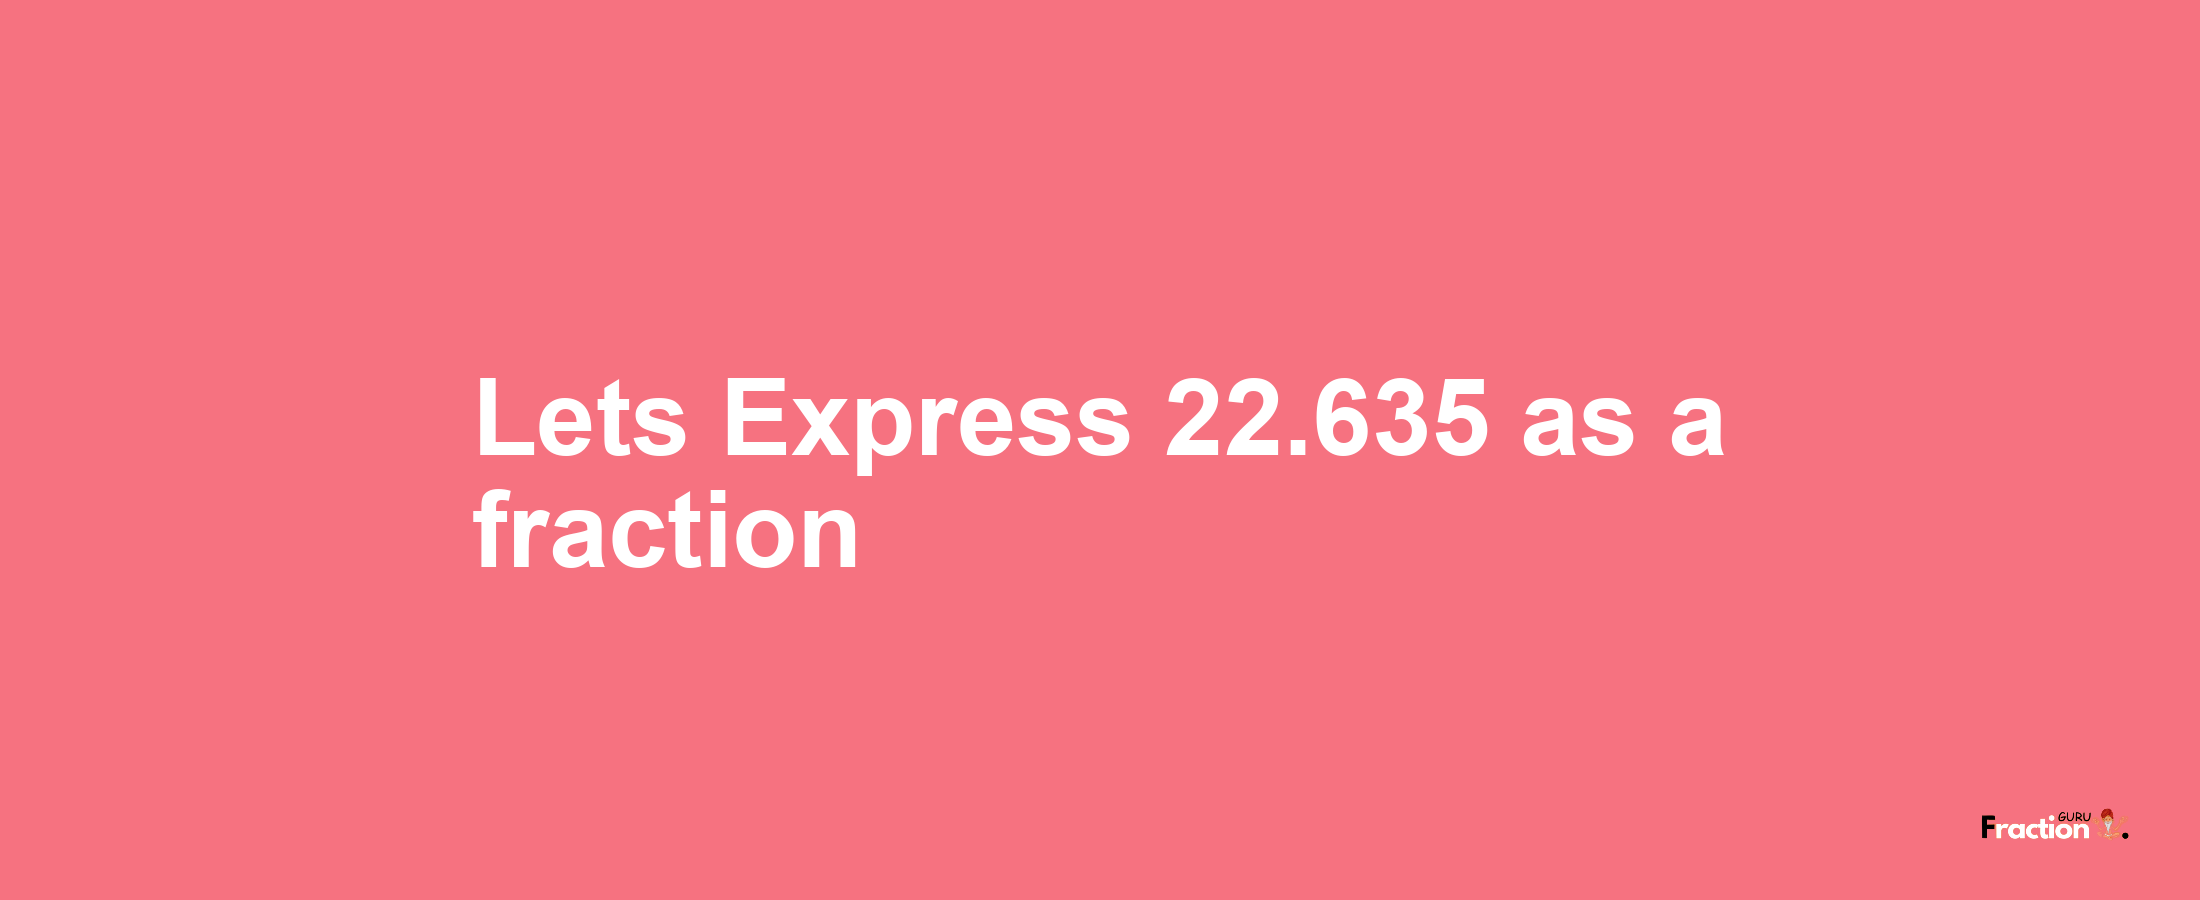 Lets Express 22.635 as afraction